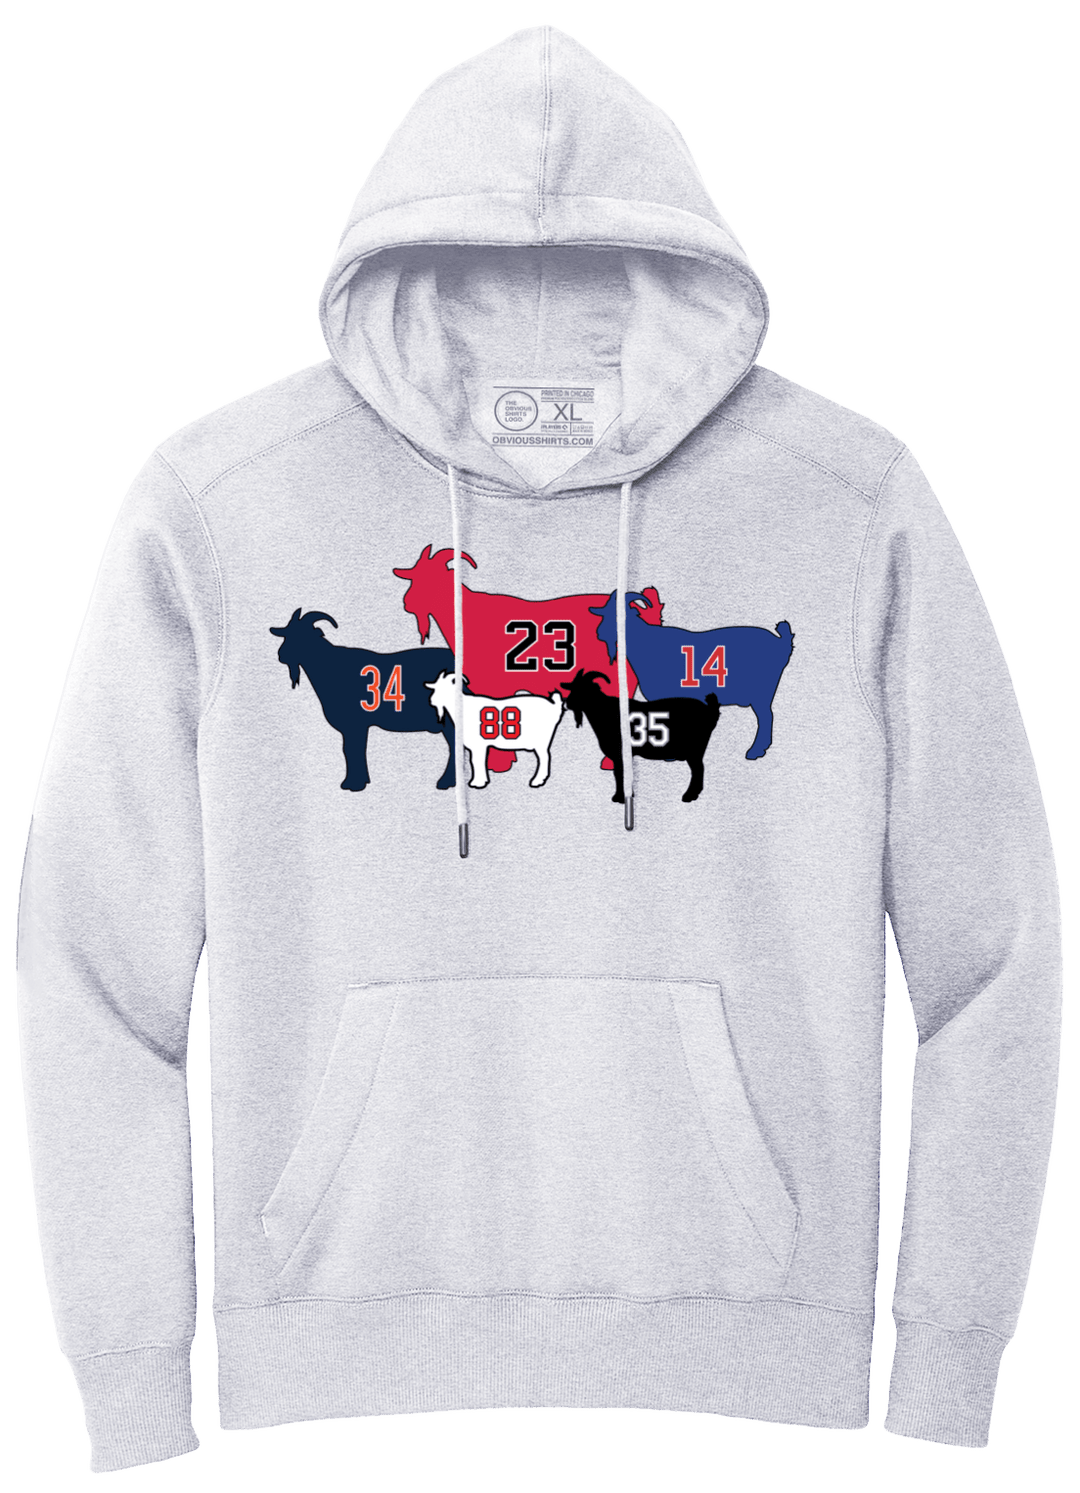 THE CHICAGOATS ALL SPORTS (HOODED SWEATSHIRT) - OBVIOUS SHIRTS